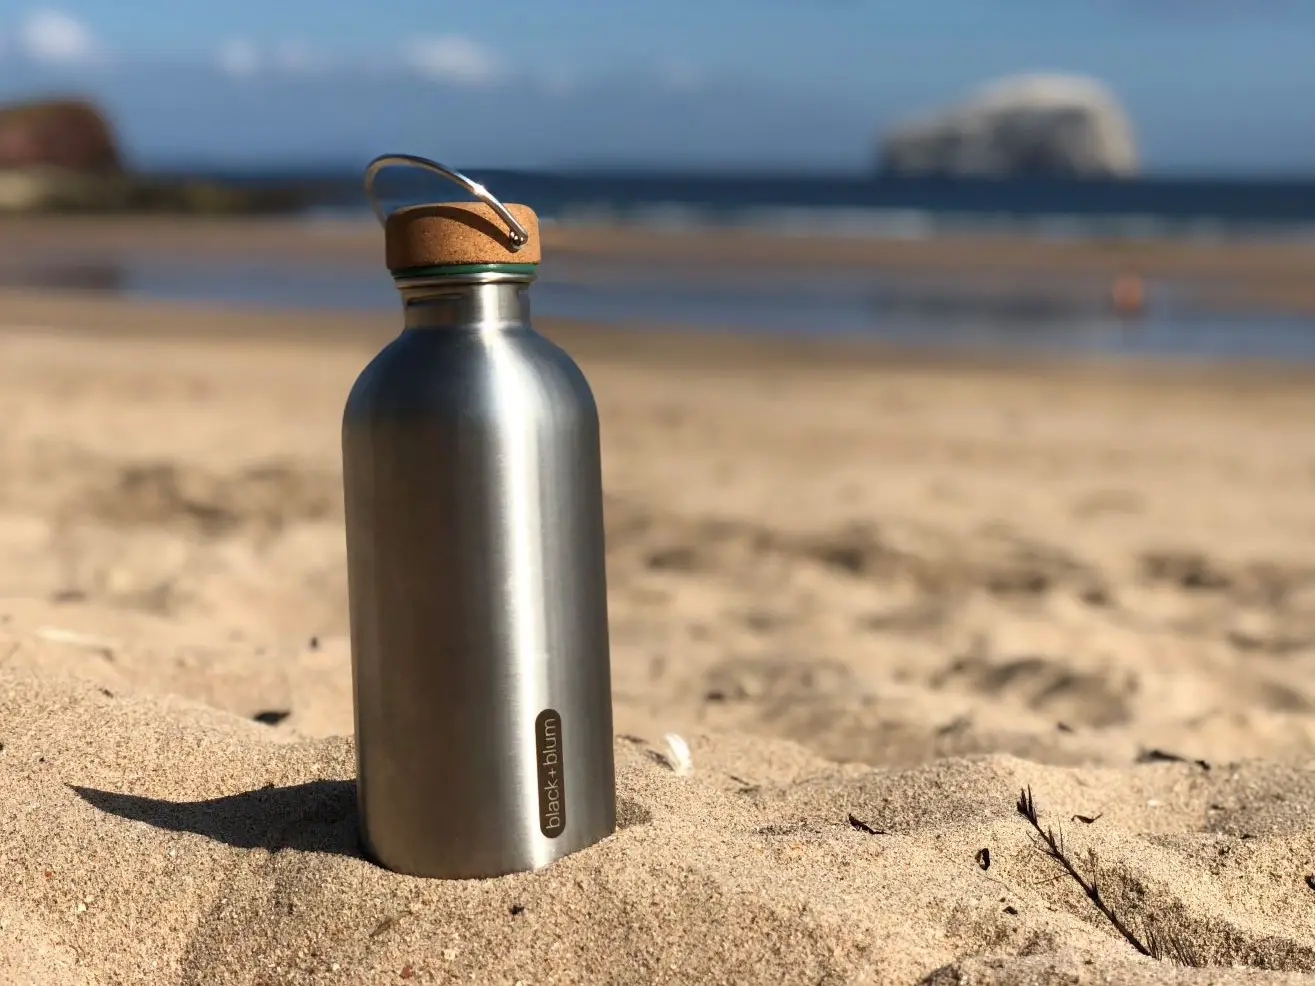 How to Clean Stainless Steel Water Bottles (6 step guide)